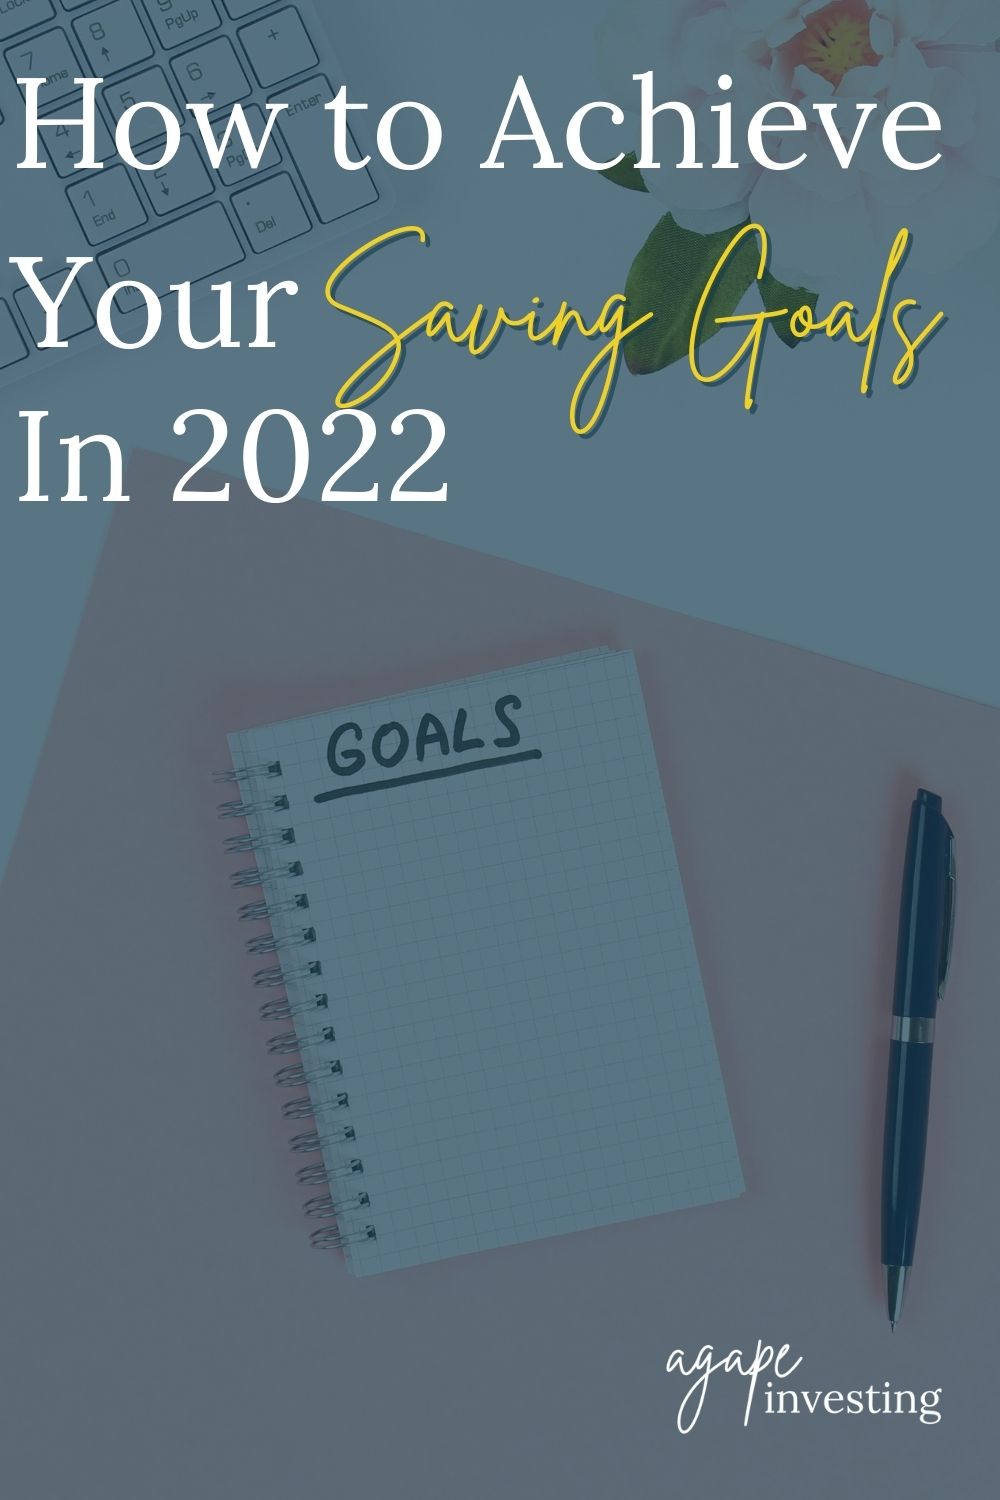 Learn how to invite the Lord into your finances and how to achieve your savings goals in 2022. Through prayer, action, and obedience, you will surely achieve your savings goals this year.